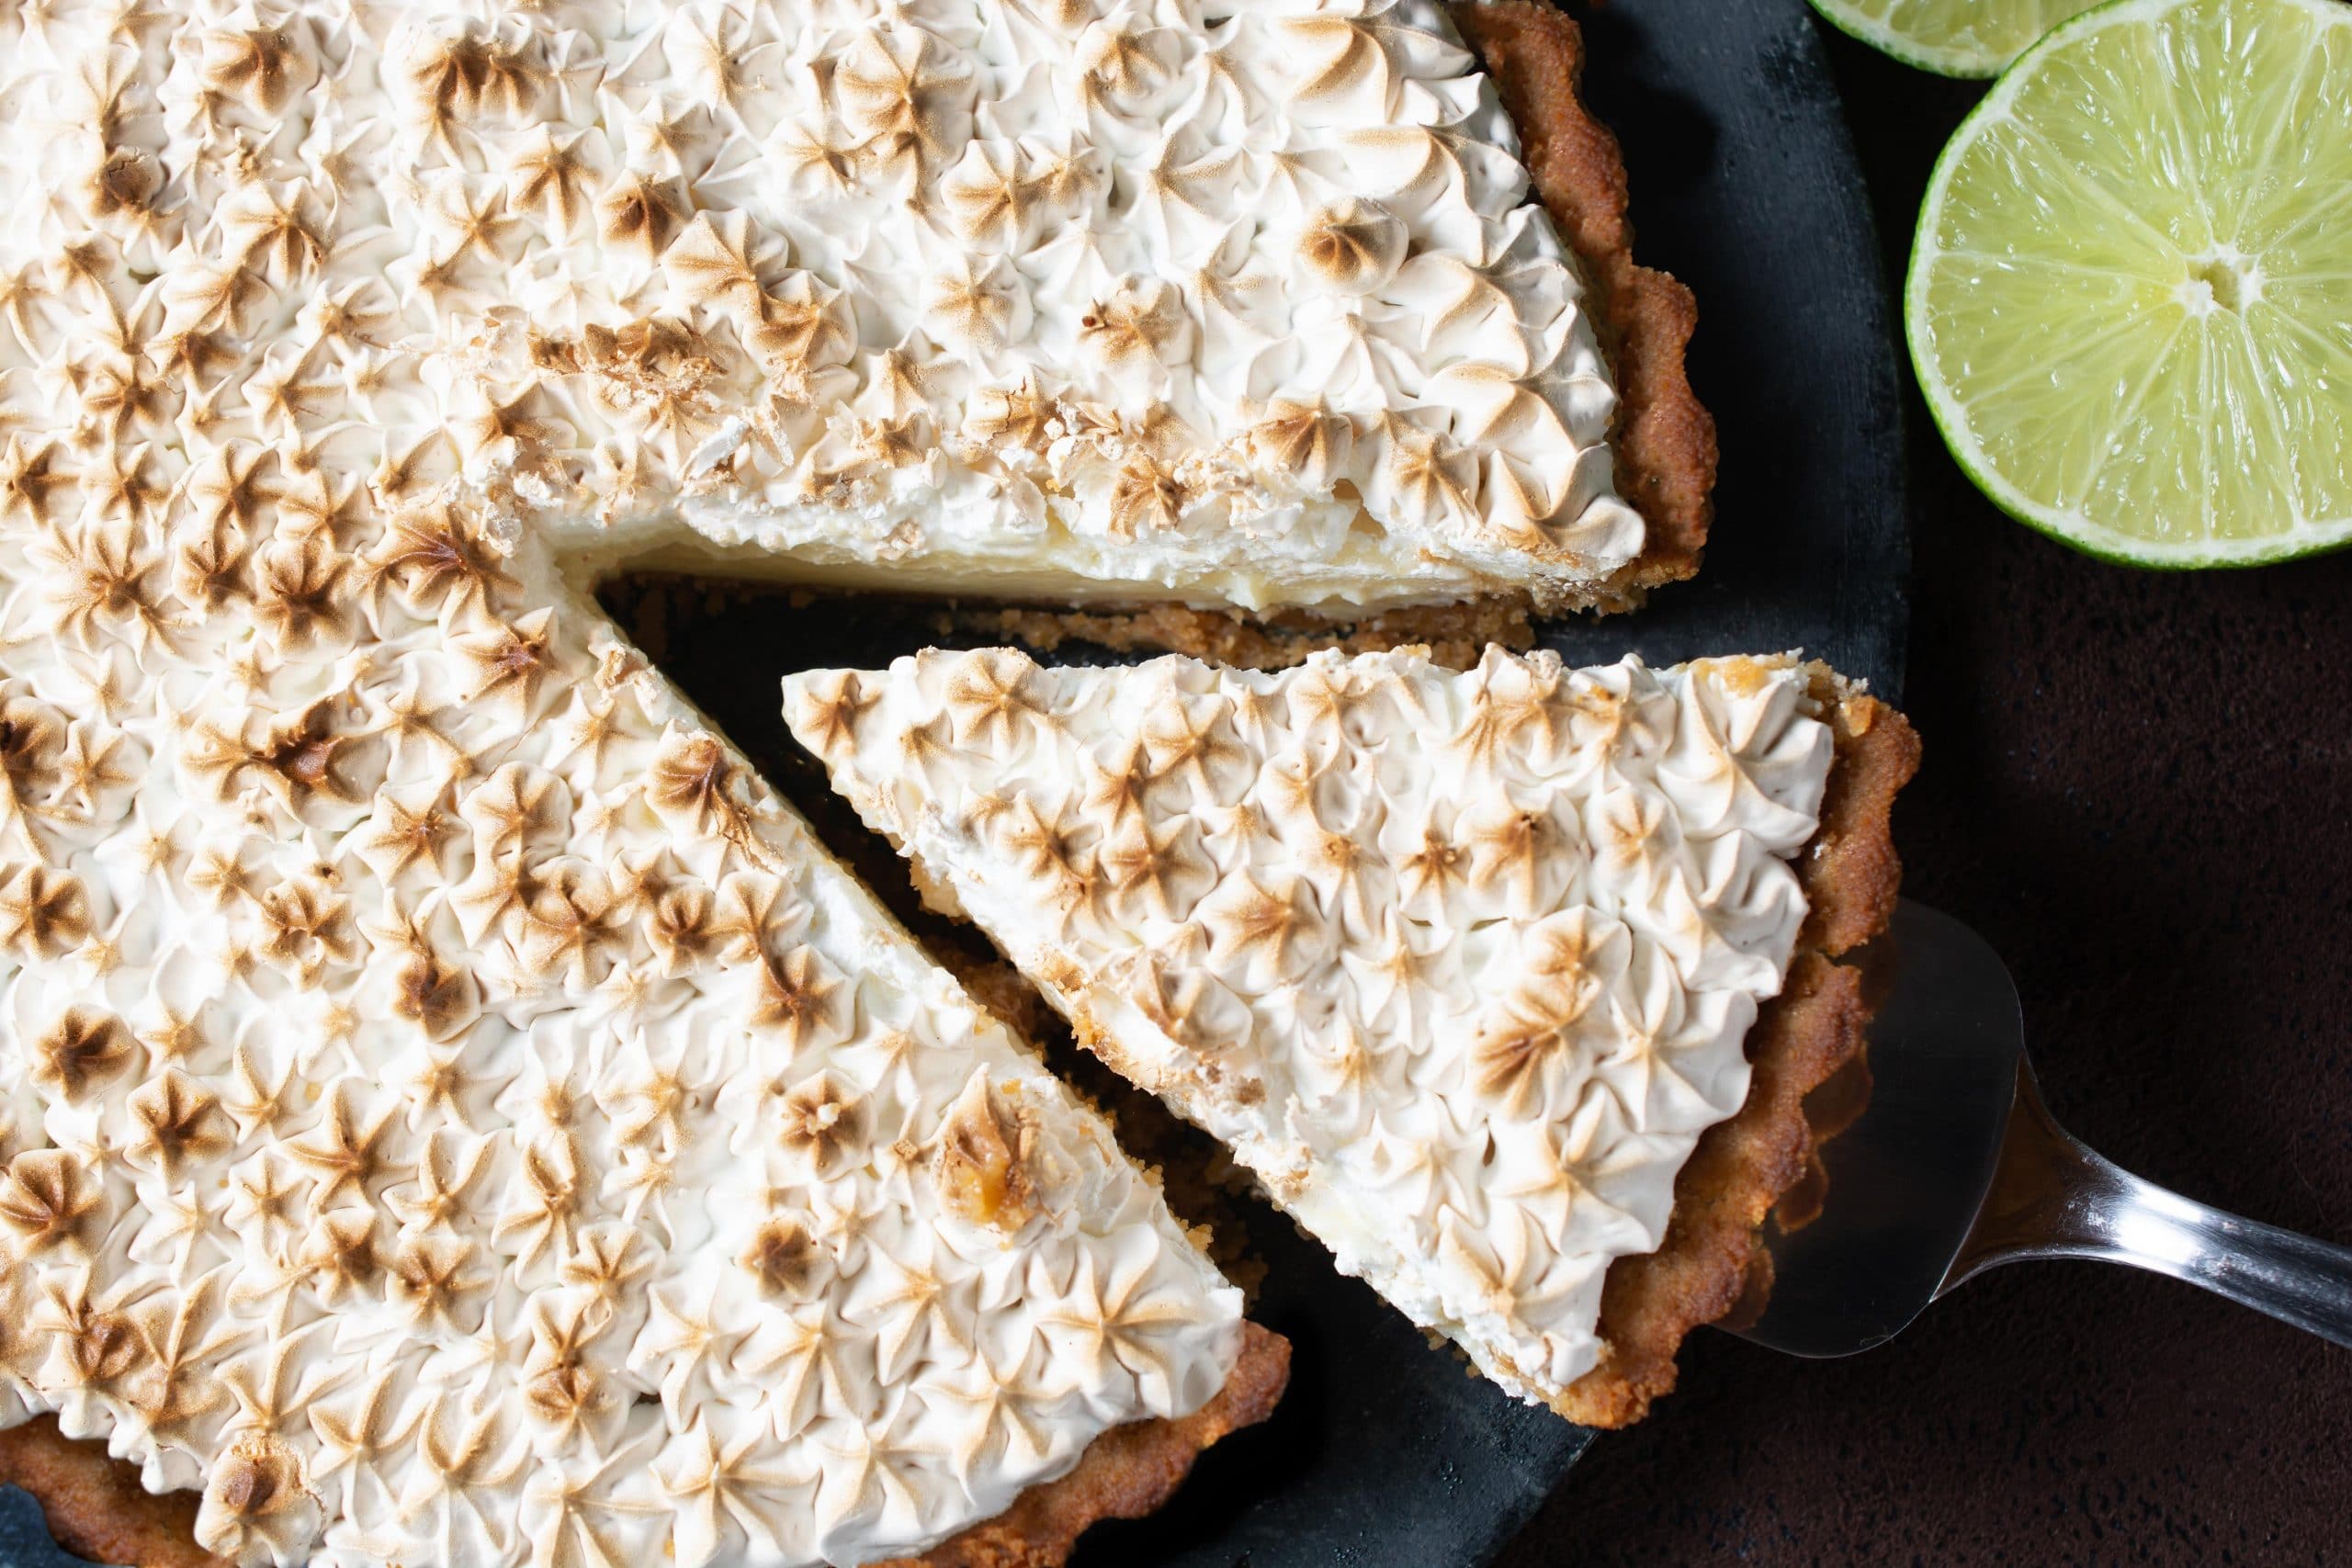 The Mystery Case Surrounding the Lemon Meringue Pie Topping scaled